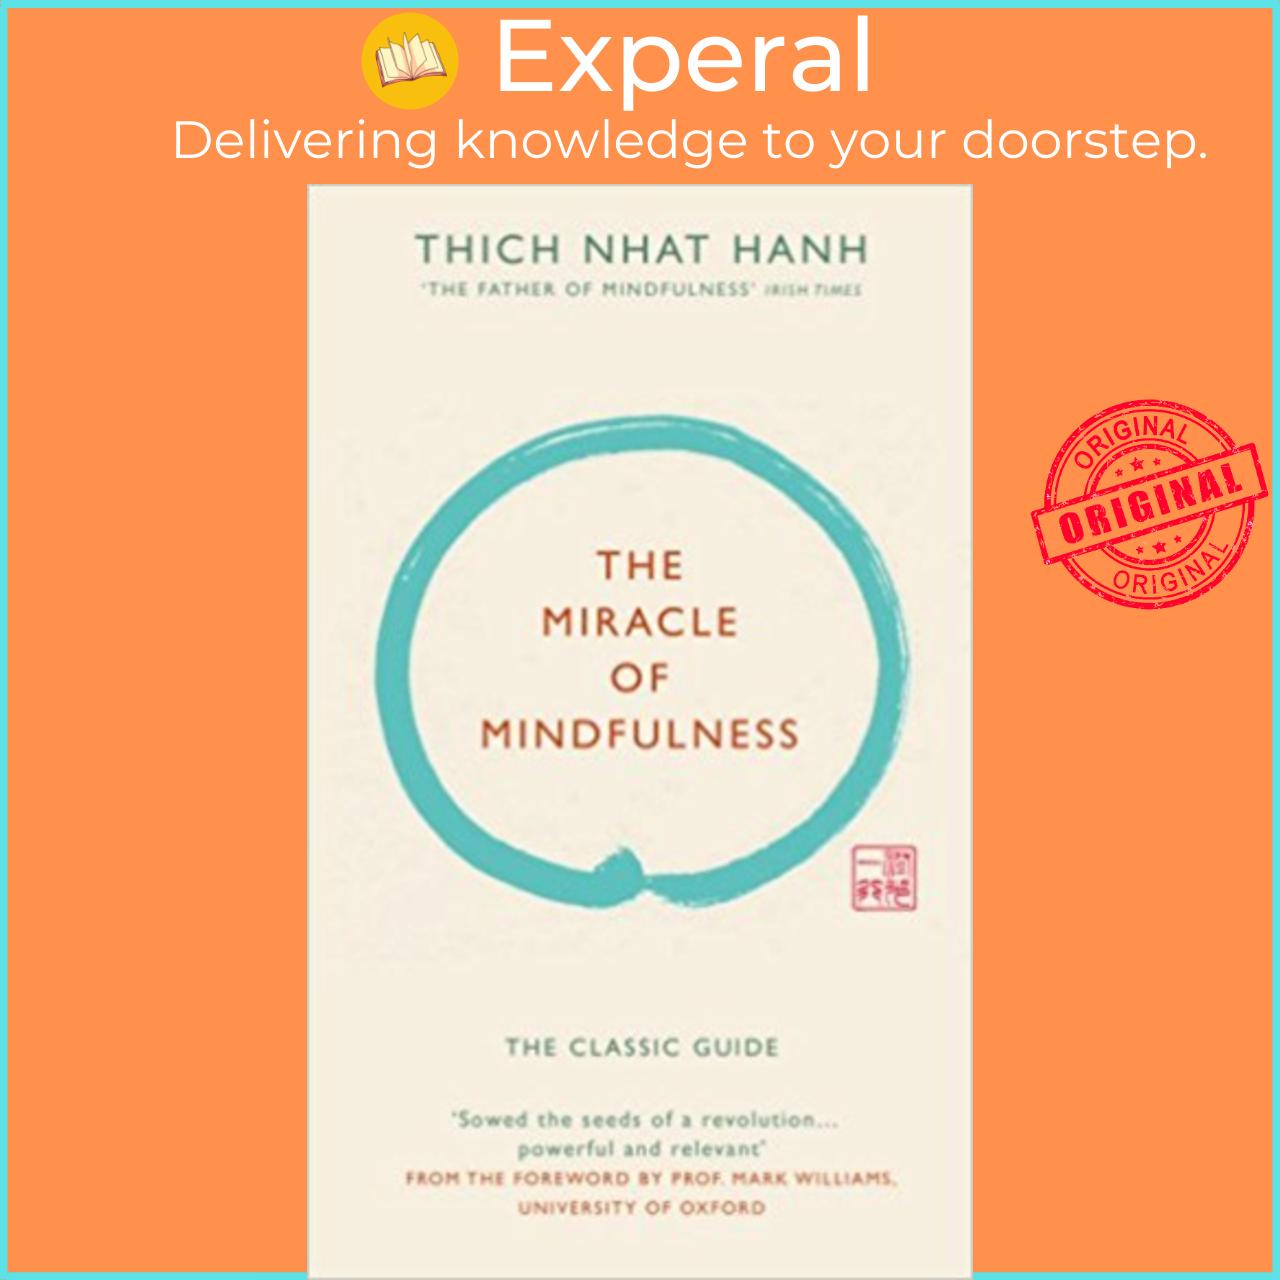 Sách - The Miracle of Mindfulness: The Classic Guide to Meditation by the Wor by Thich Nhat Hanh (UK edition, hardcover)